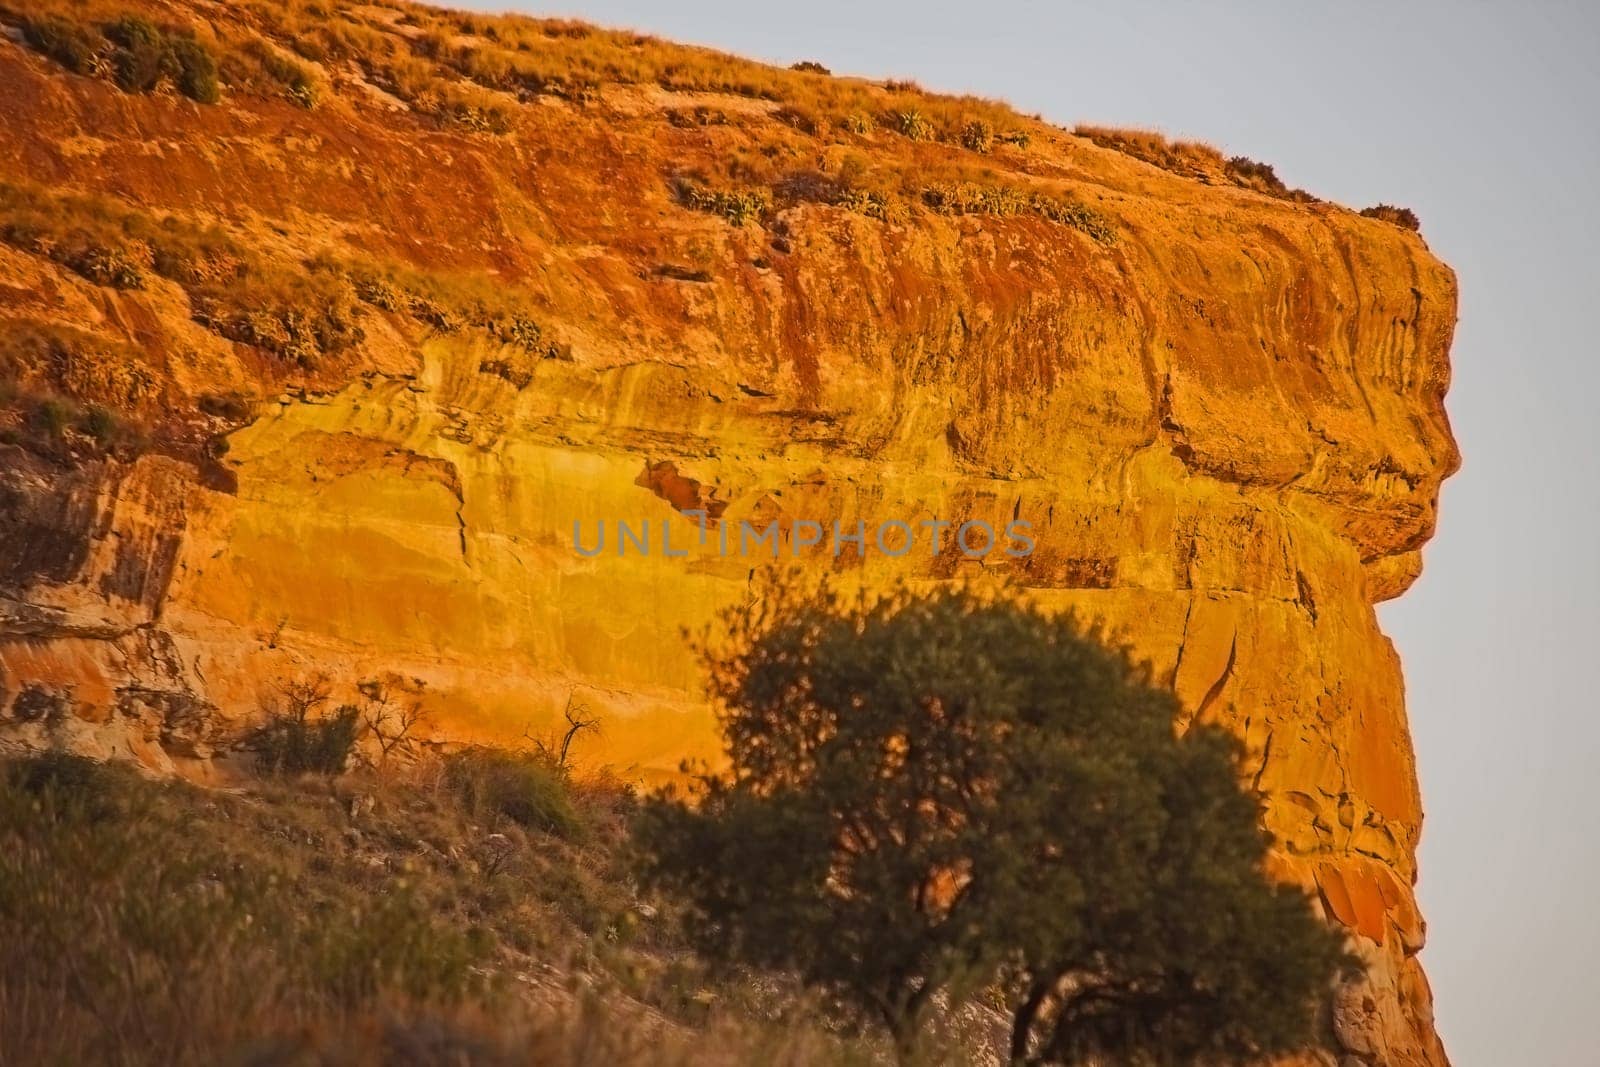 Golden Clarens sandstone cliffs near Fouriesburg in the Eastern Free State Province. South Africa